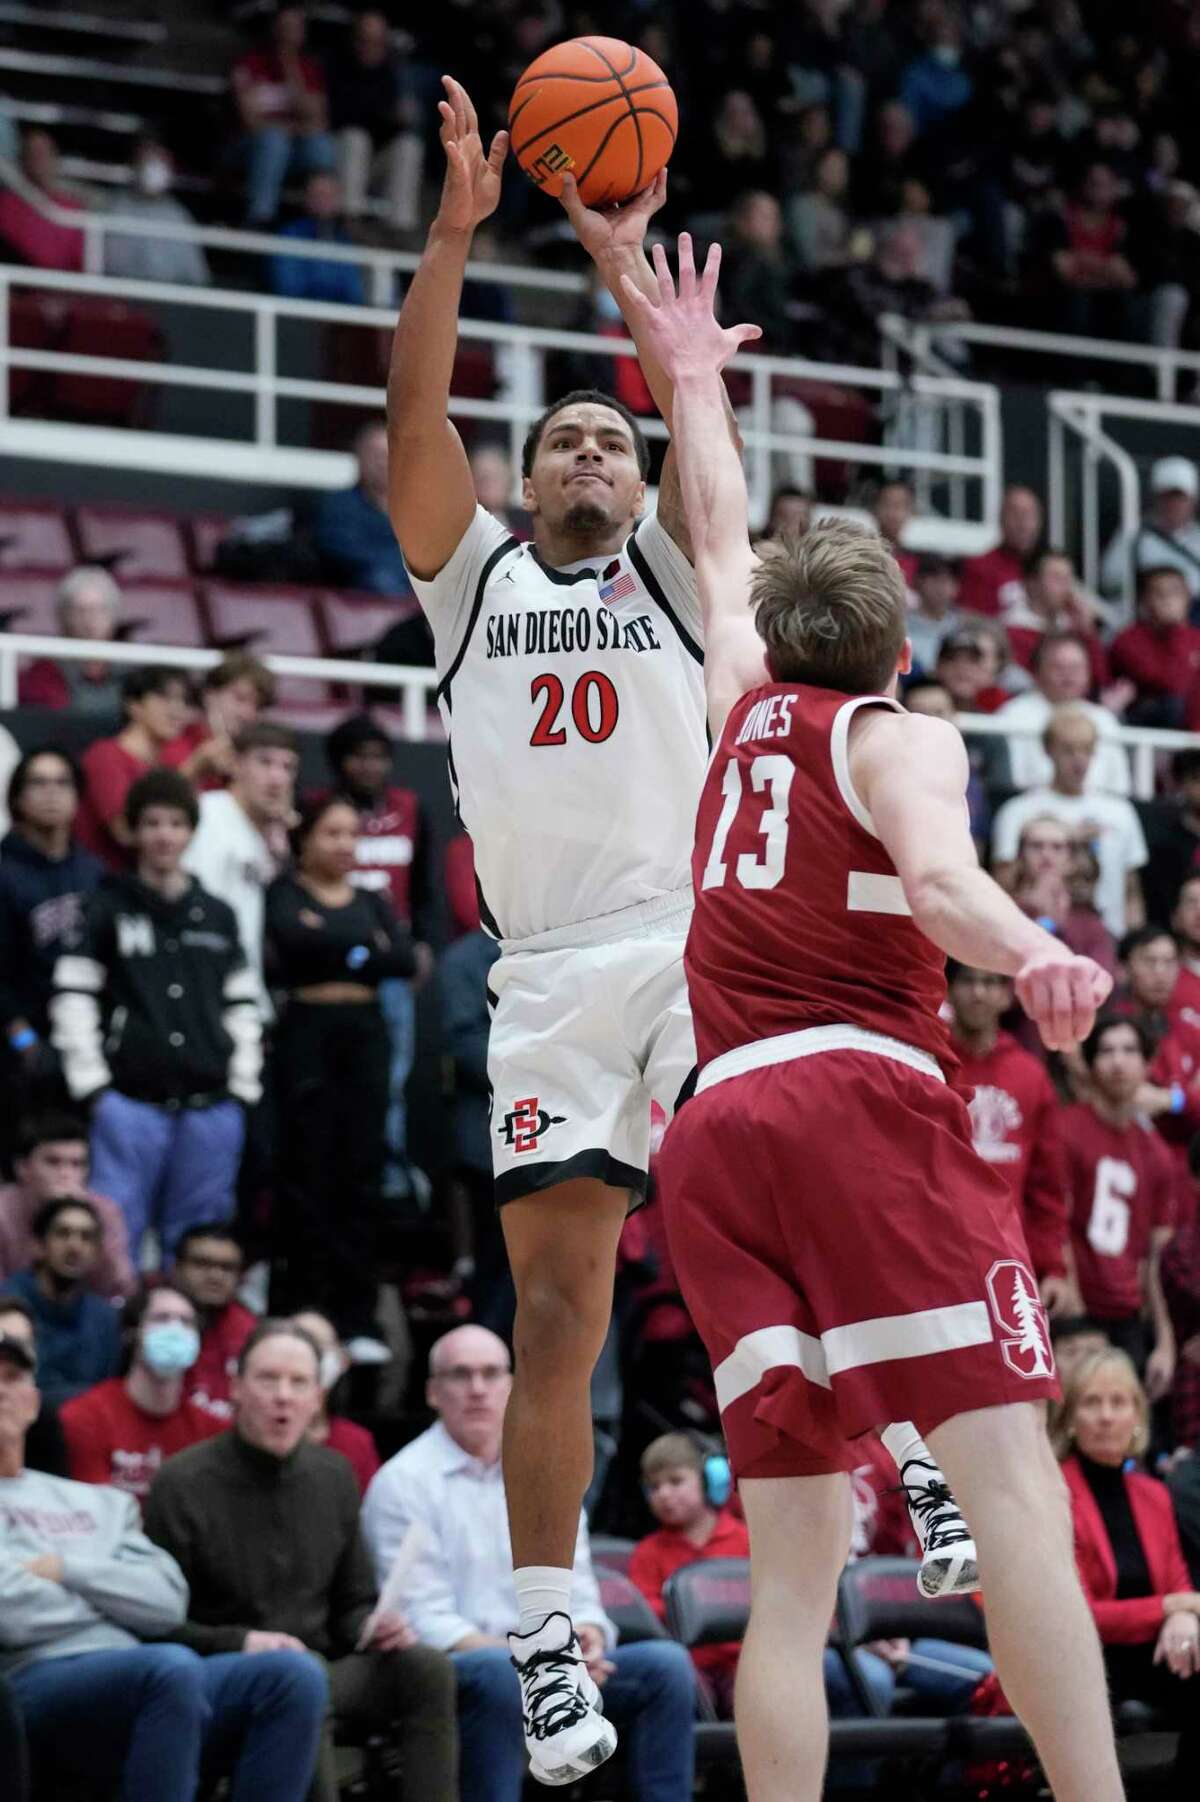 San Diego State guard Matt Bradley (20) shoots over Stanford guard Michael Jones (13) during the first half of an NCAA college basketball game in Stanford, Calif., Tuesday, Nov. 15, 2022. (AP Photo/Godofredo A. Vásquez)